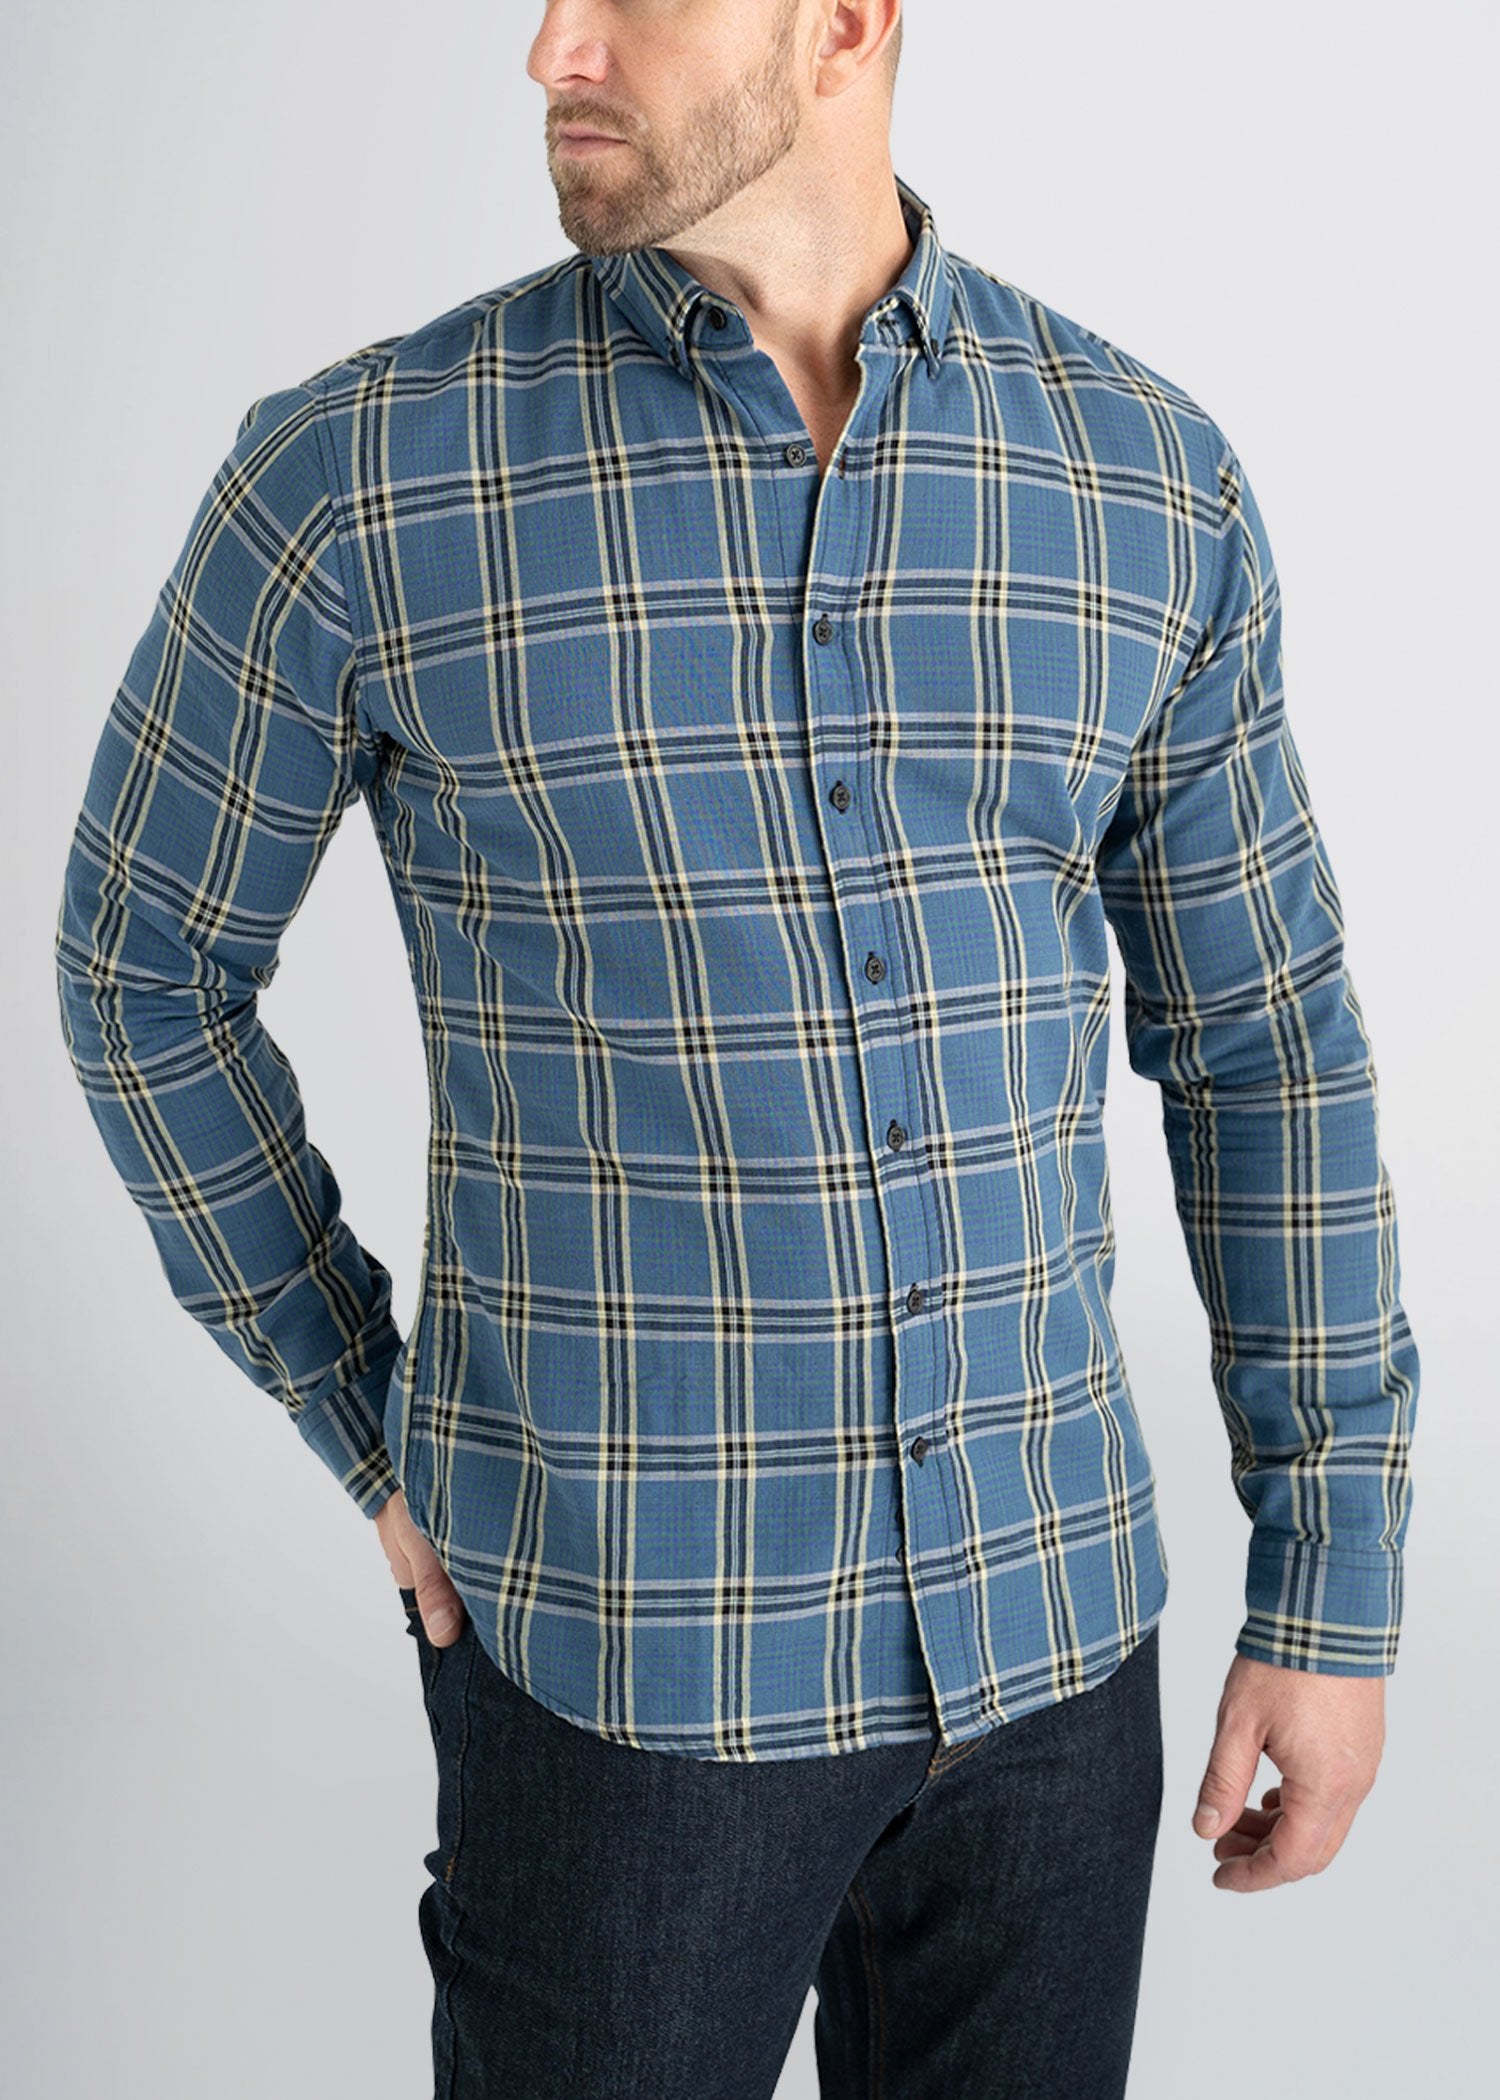 american-tall-mens-double-weave-blueplaid-front